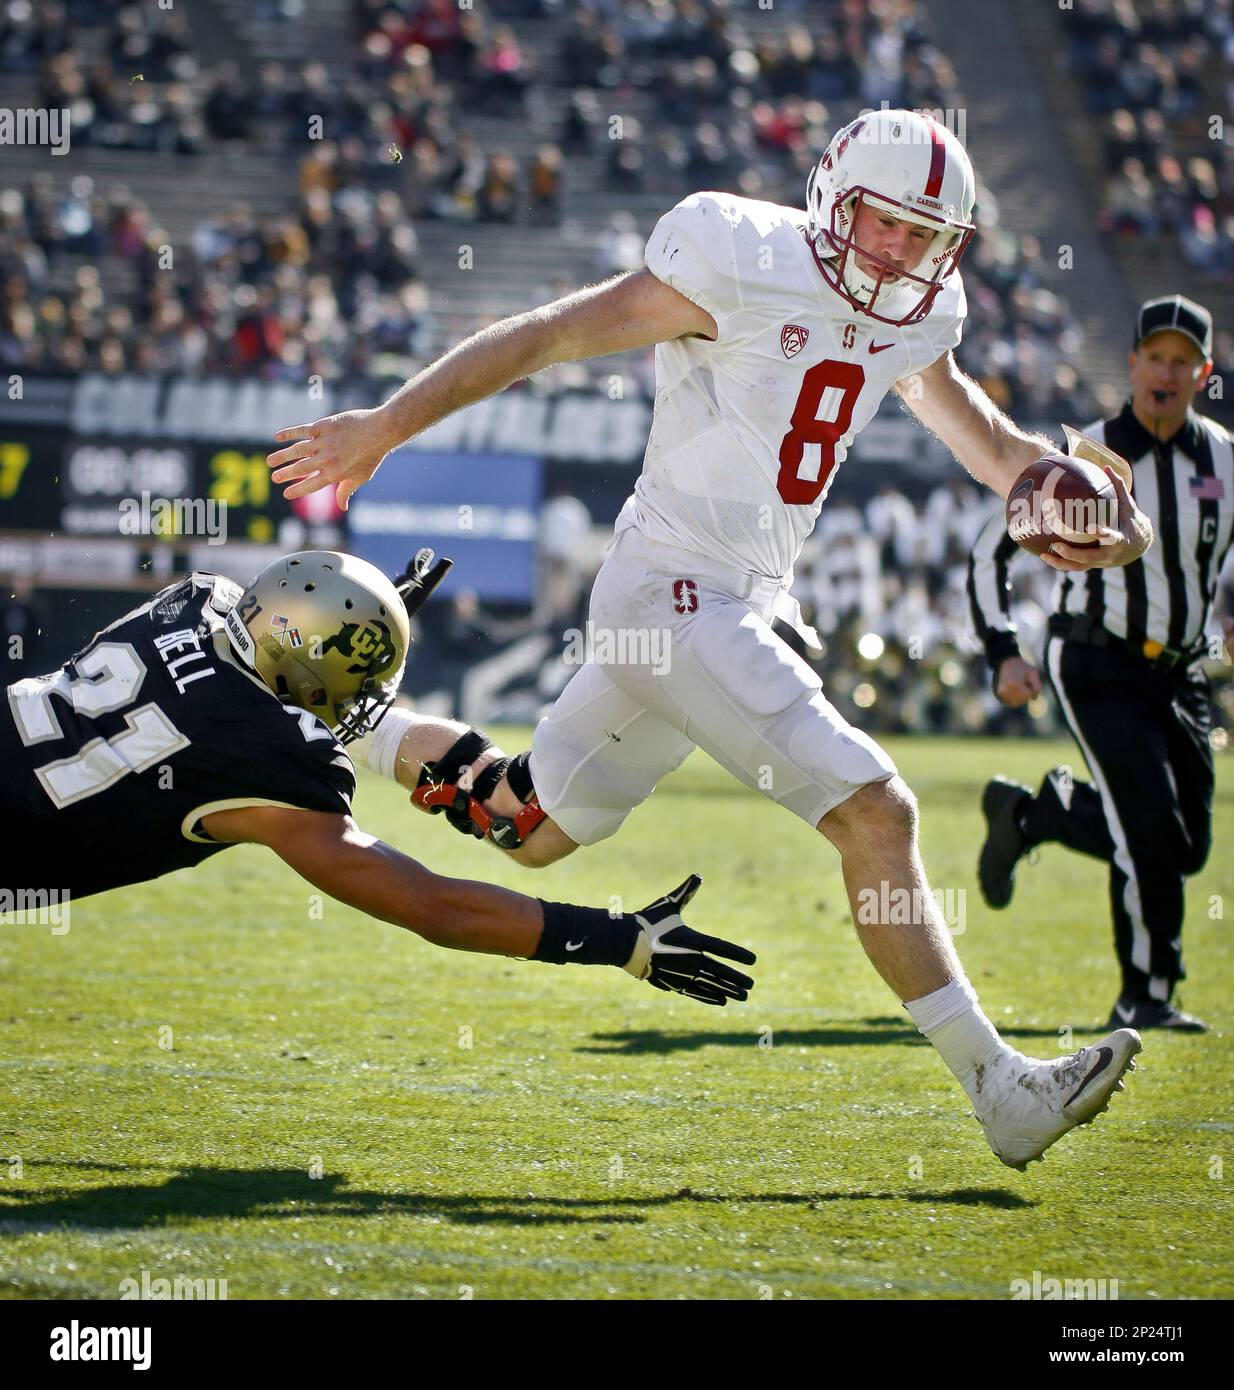 SHOT 11/7/15 1:24:49 PM - Colorado's Jered Bell #21 attempts to tackle  Stanford's Kevin Hogan #8 during their regular season Pac-12 football game  at Folsom Field in Boulder, Co. Stanford won the